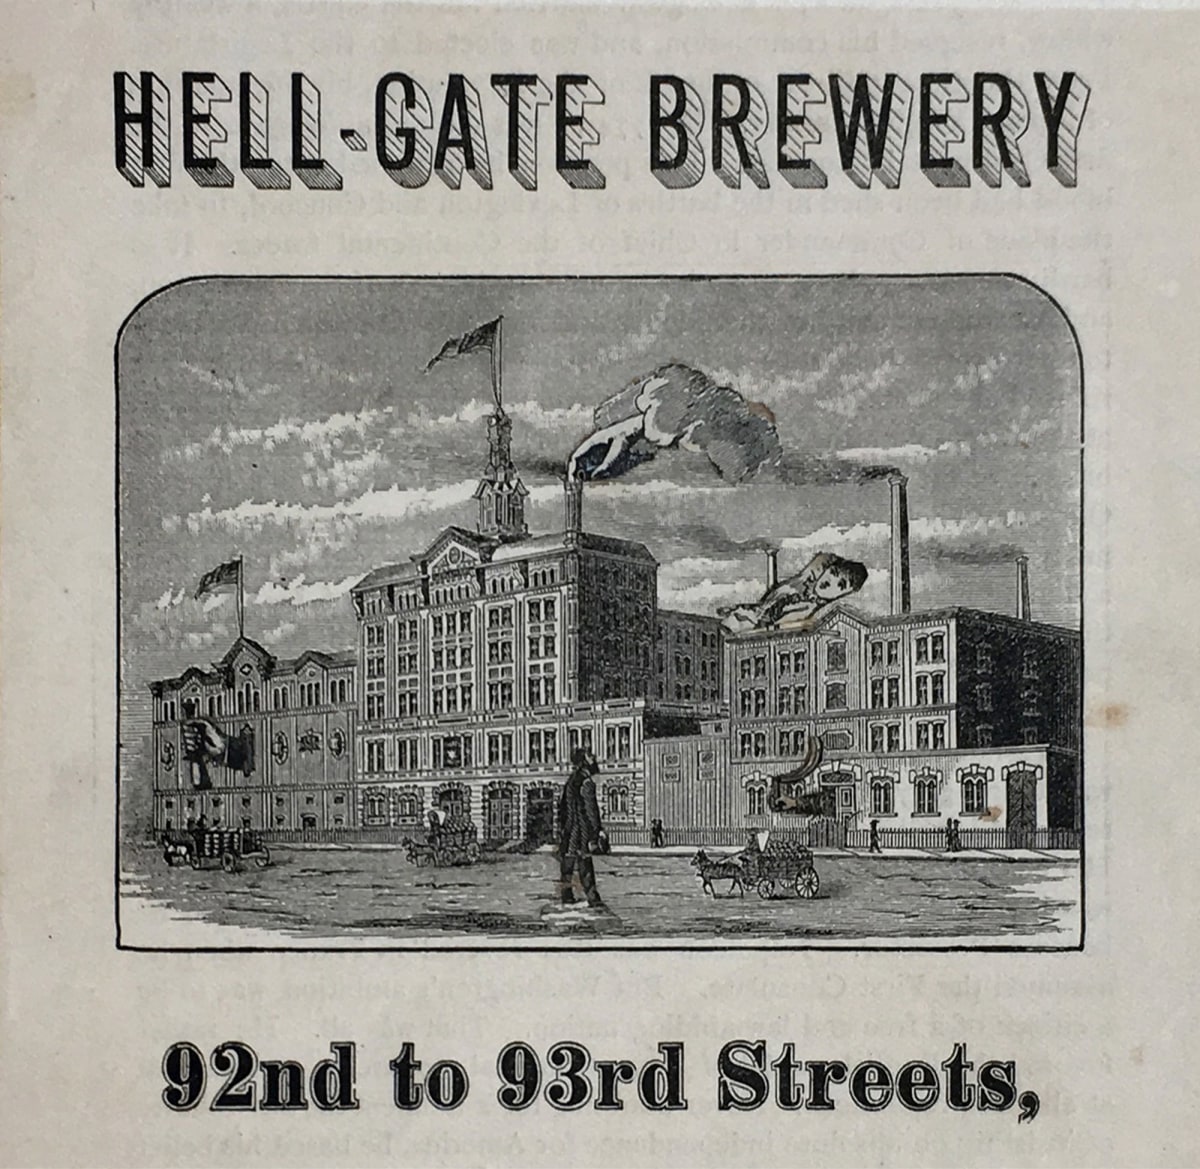 Nathan Gluck Hell Gate Brewery 92nd to 93rd Streets, 1941